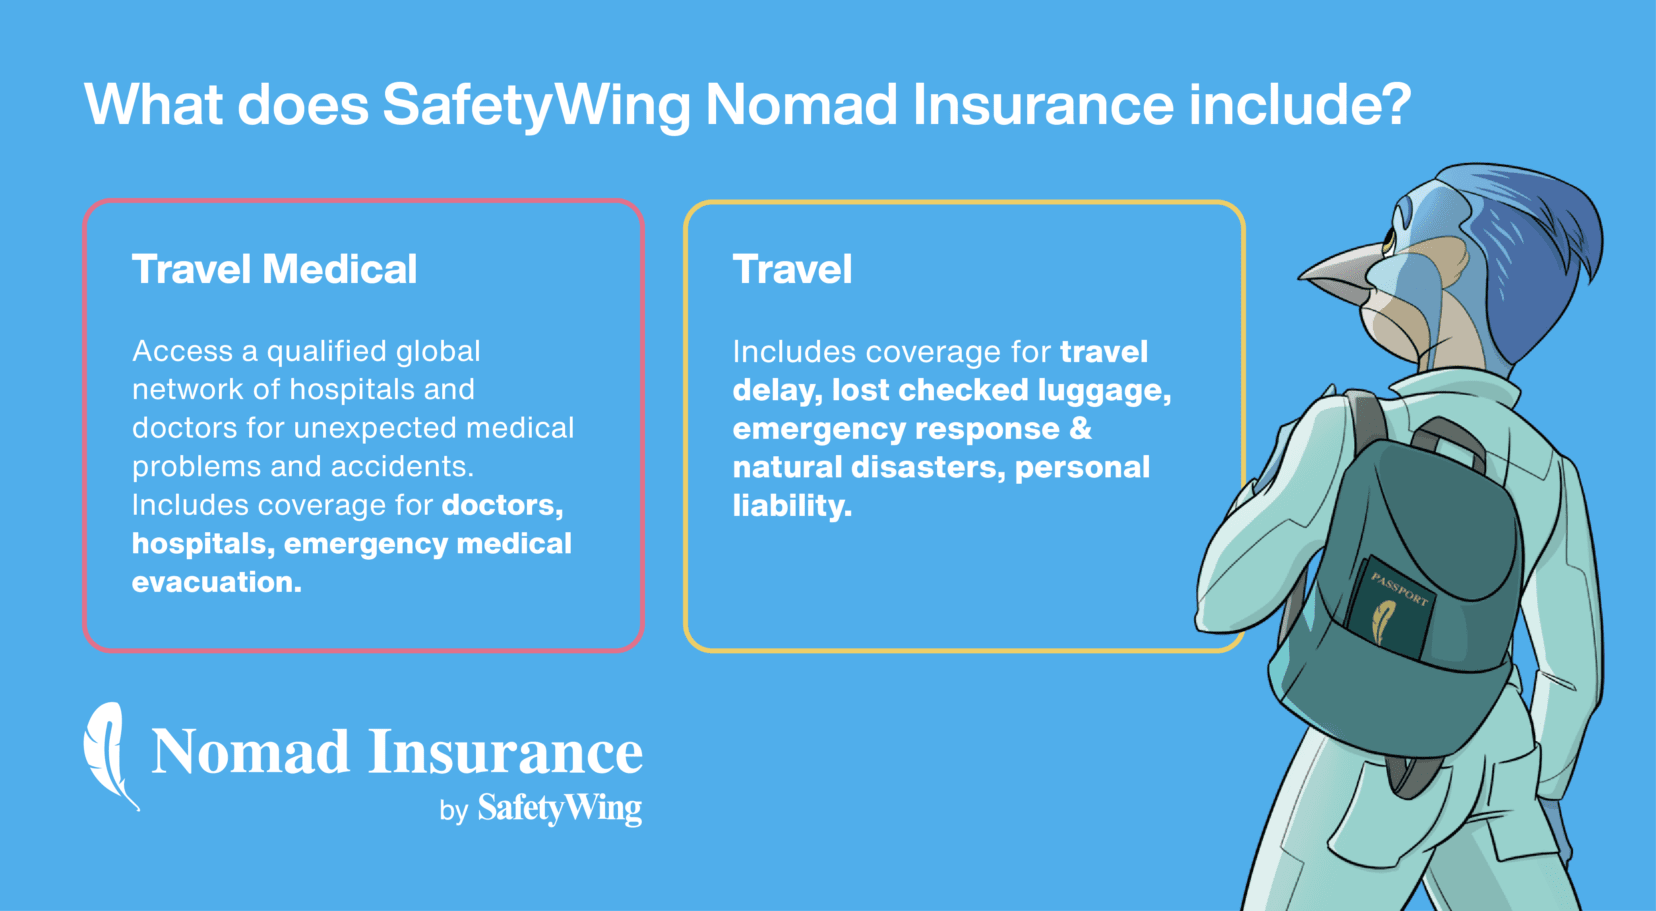 Why we use SafetyWing Travel Insurance